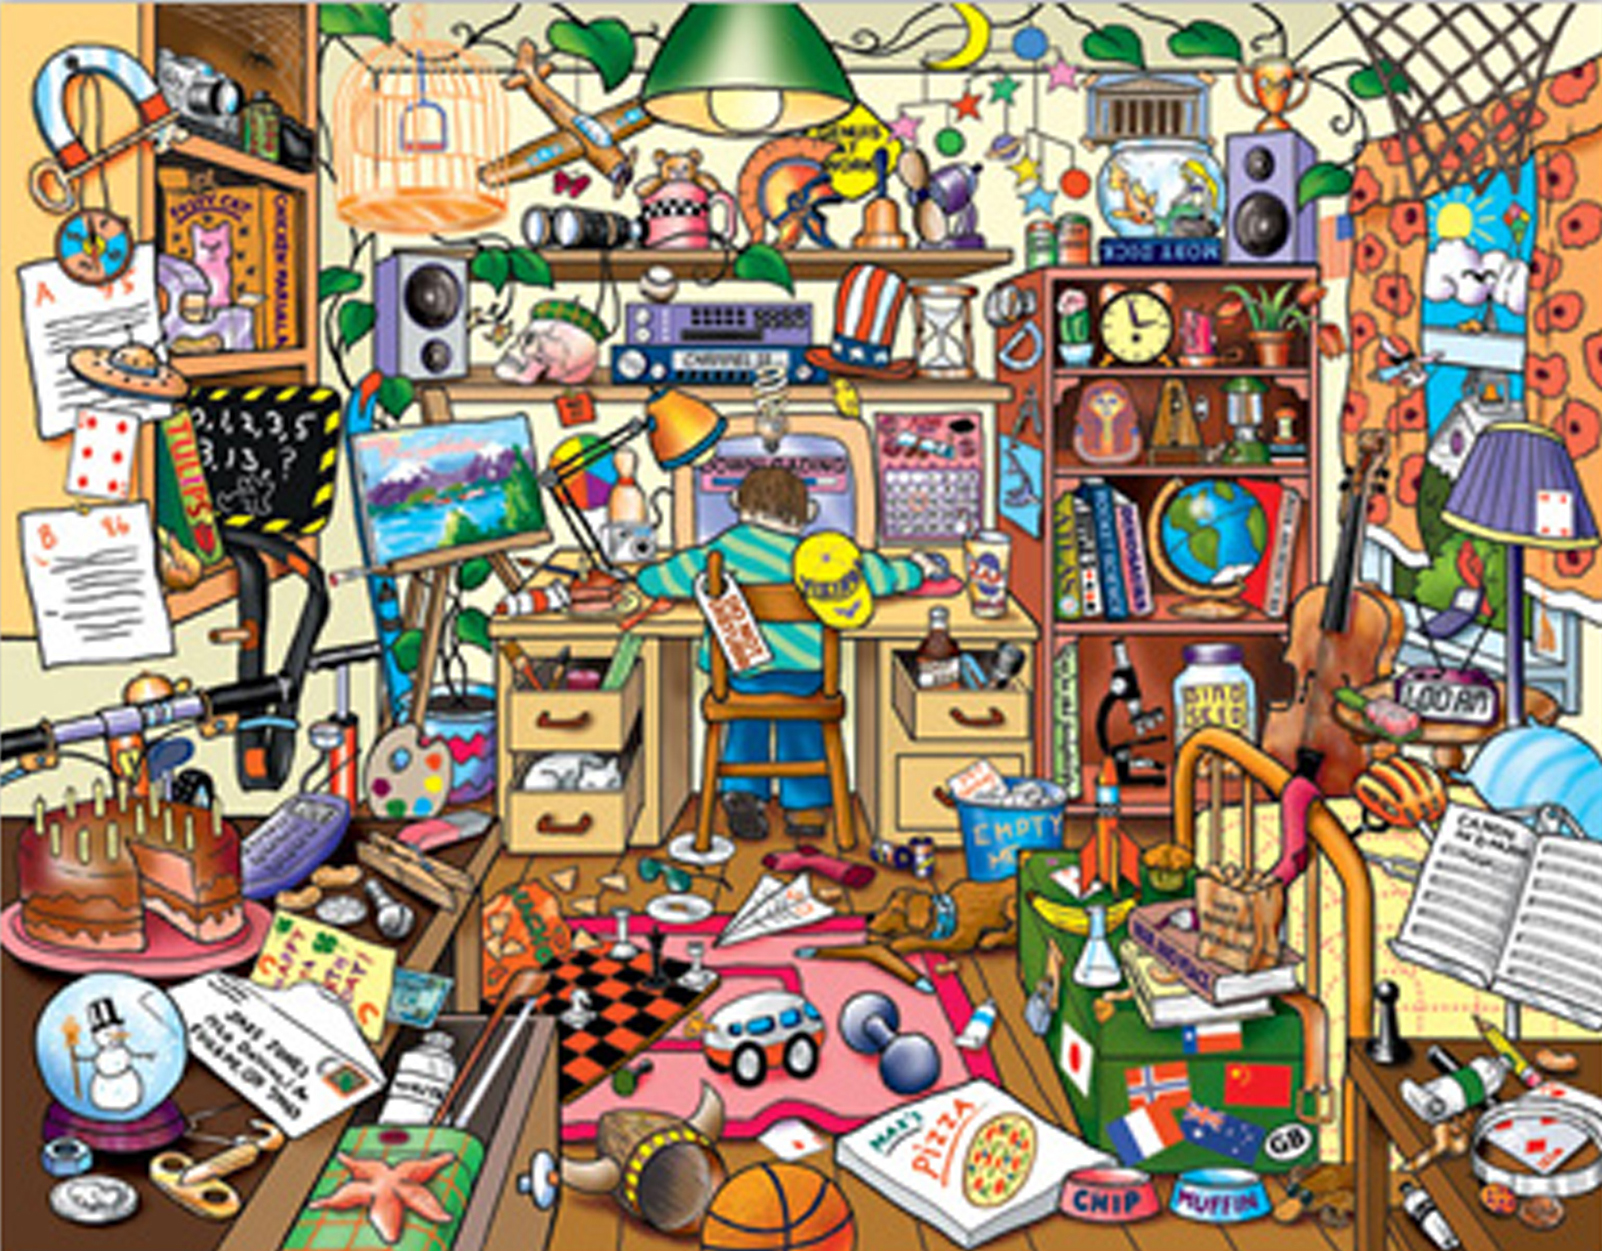 messy living room cartoon images